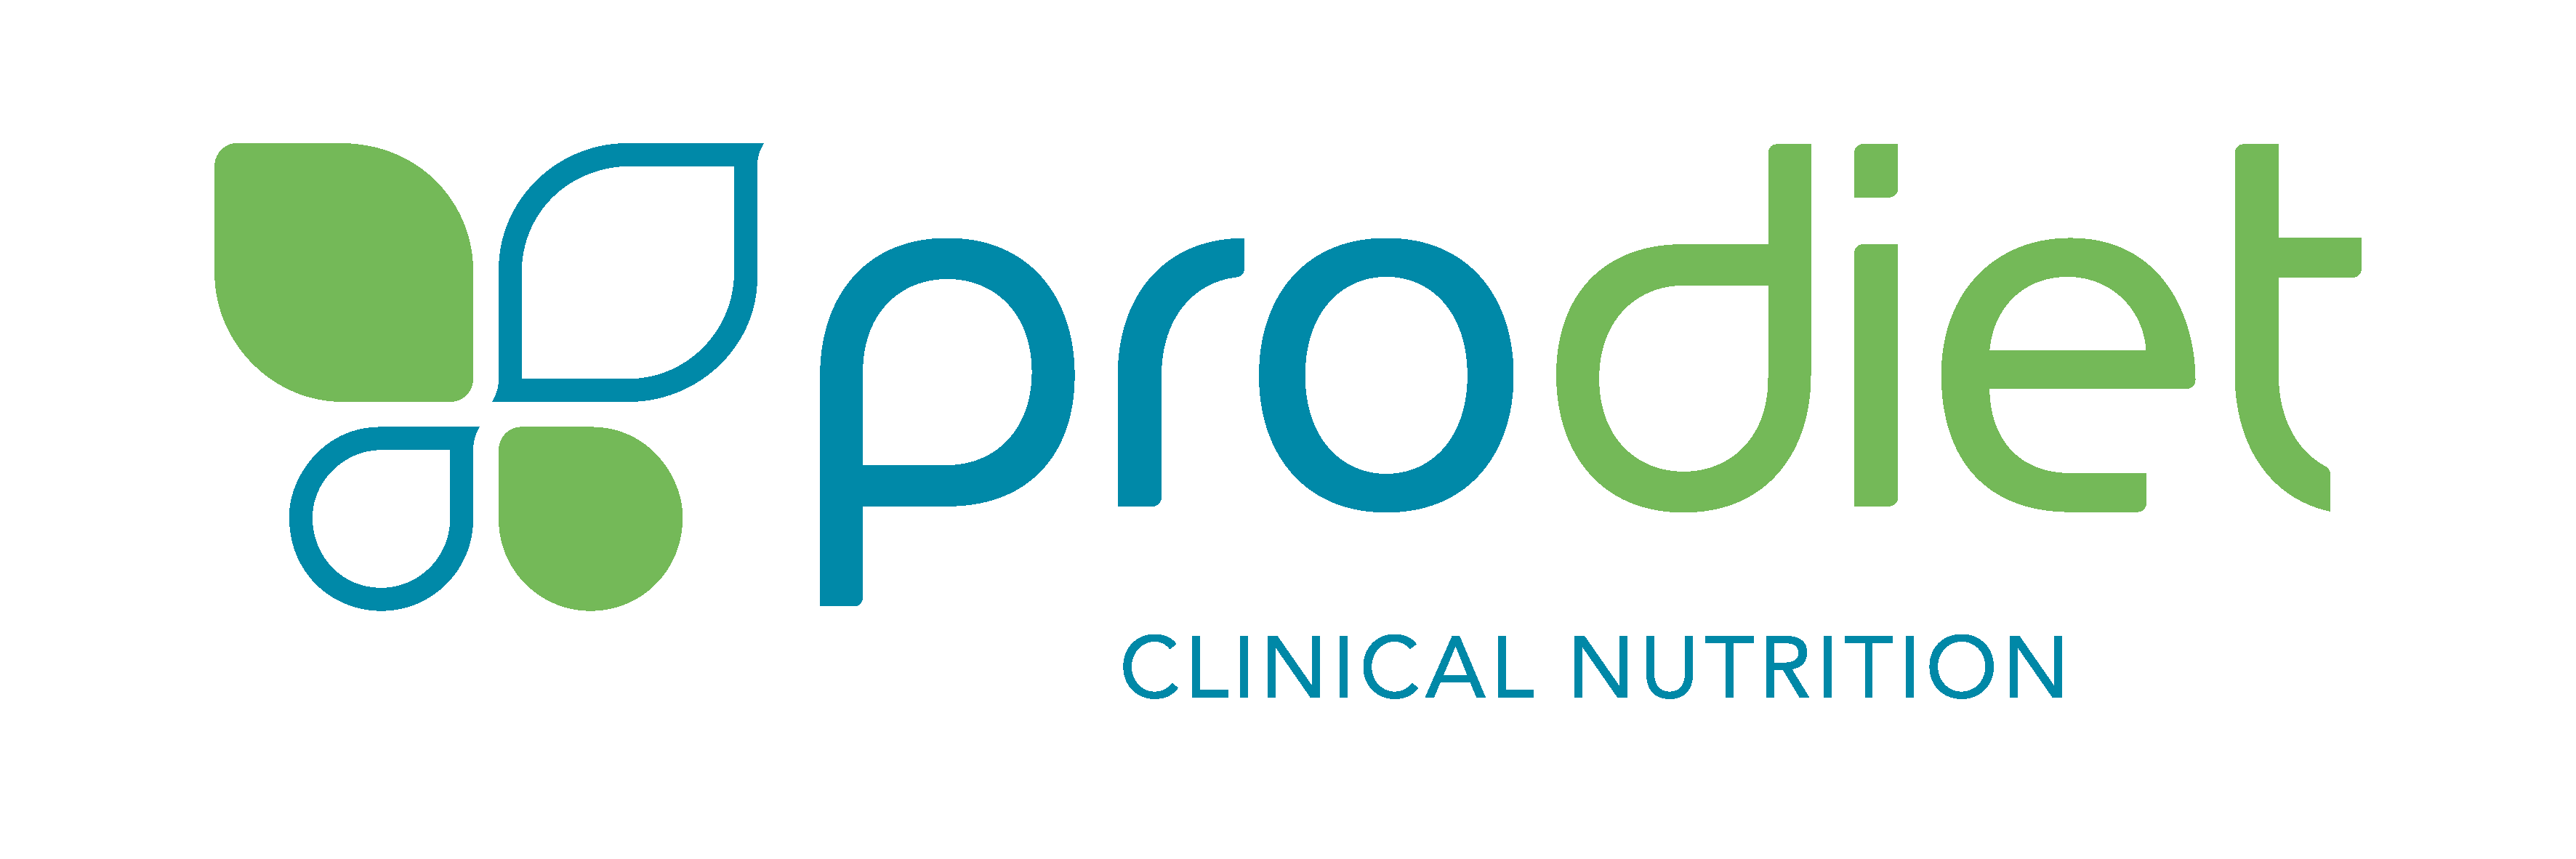 PRODIET CLINICAL NUTRITION - moliveira@prodietnutrition.com - http://prodietnutrition.com/ - 554133422825 - Prodiet Nutrition is a company with a broad range of Enteral Feeding and Oral Nutrition Supplements suitable for adults and children with a diverse set of nutritional requirements. We produce both liquid and powder formulas, marketable to a wide range of consumer. Innovation becomes our instrument for exploring new ideas; the consistent and constant search for new ingredients, safe and practical packaging, and optimization of logistic processes, allows us to operate worldwide, with exports to the whole world. With dedication, technology and state-of-the-art infra-strutuctre, we believe in the power of nutrition to promote well-being and enhance patients’ lives.